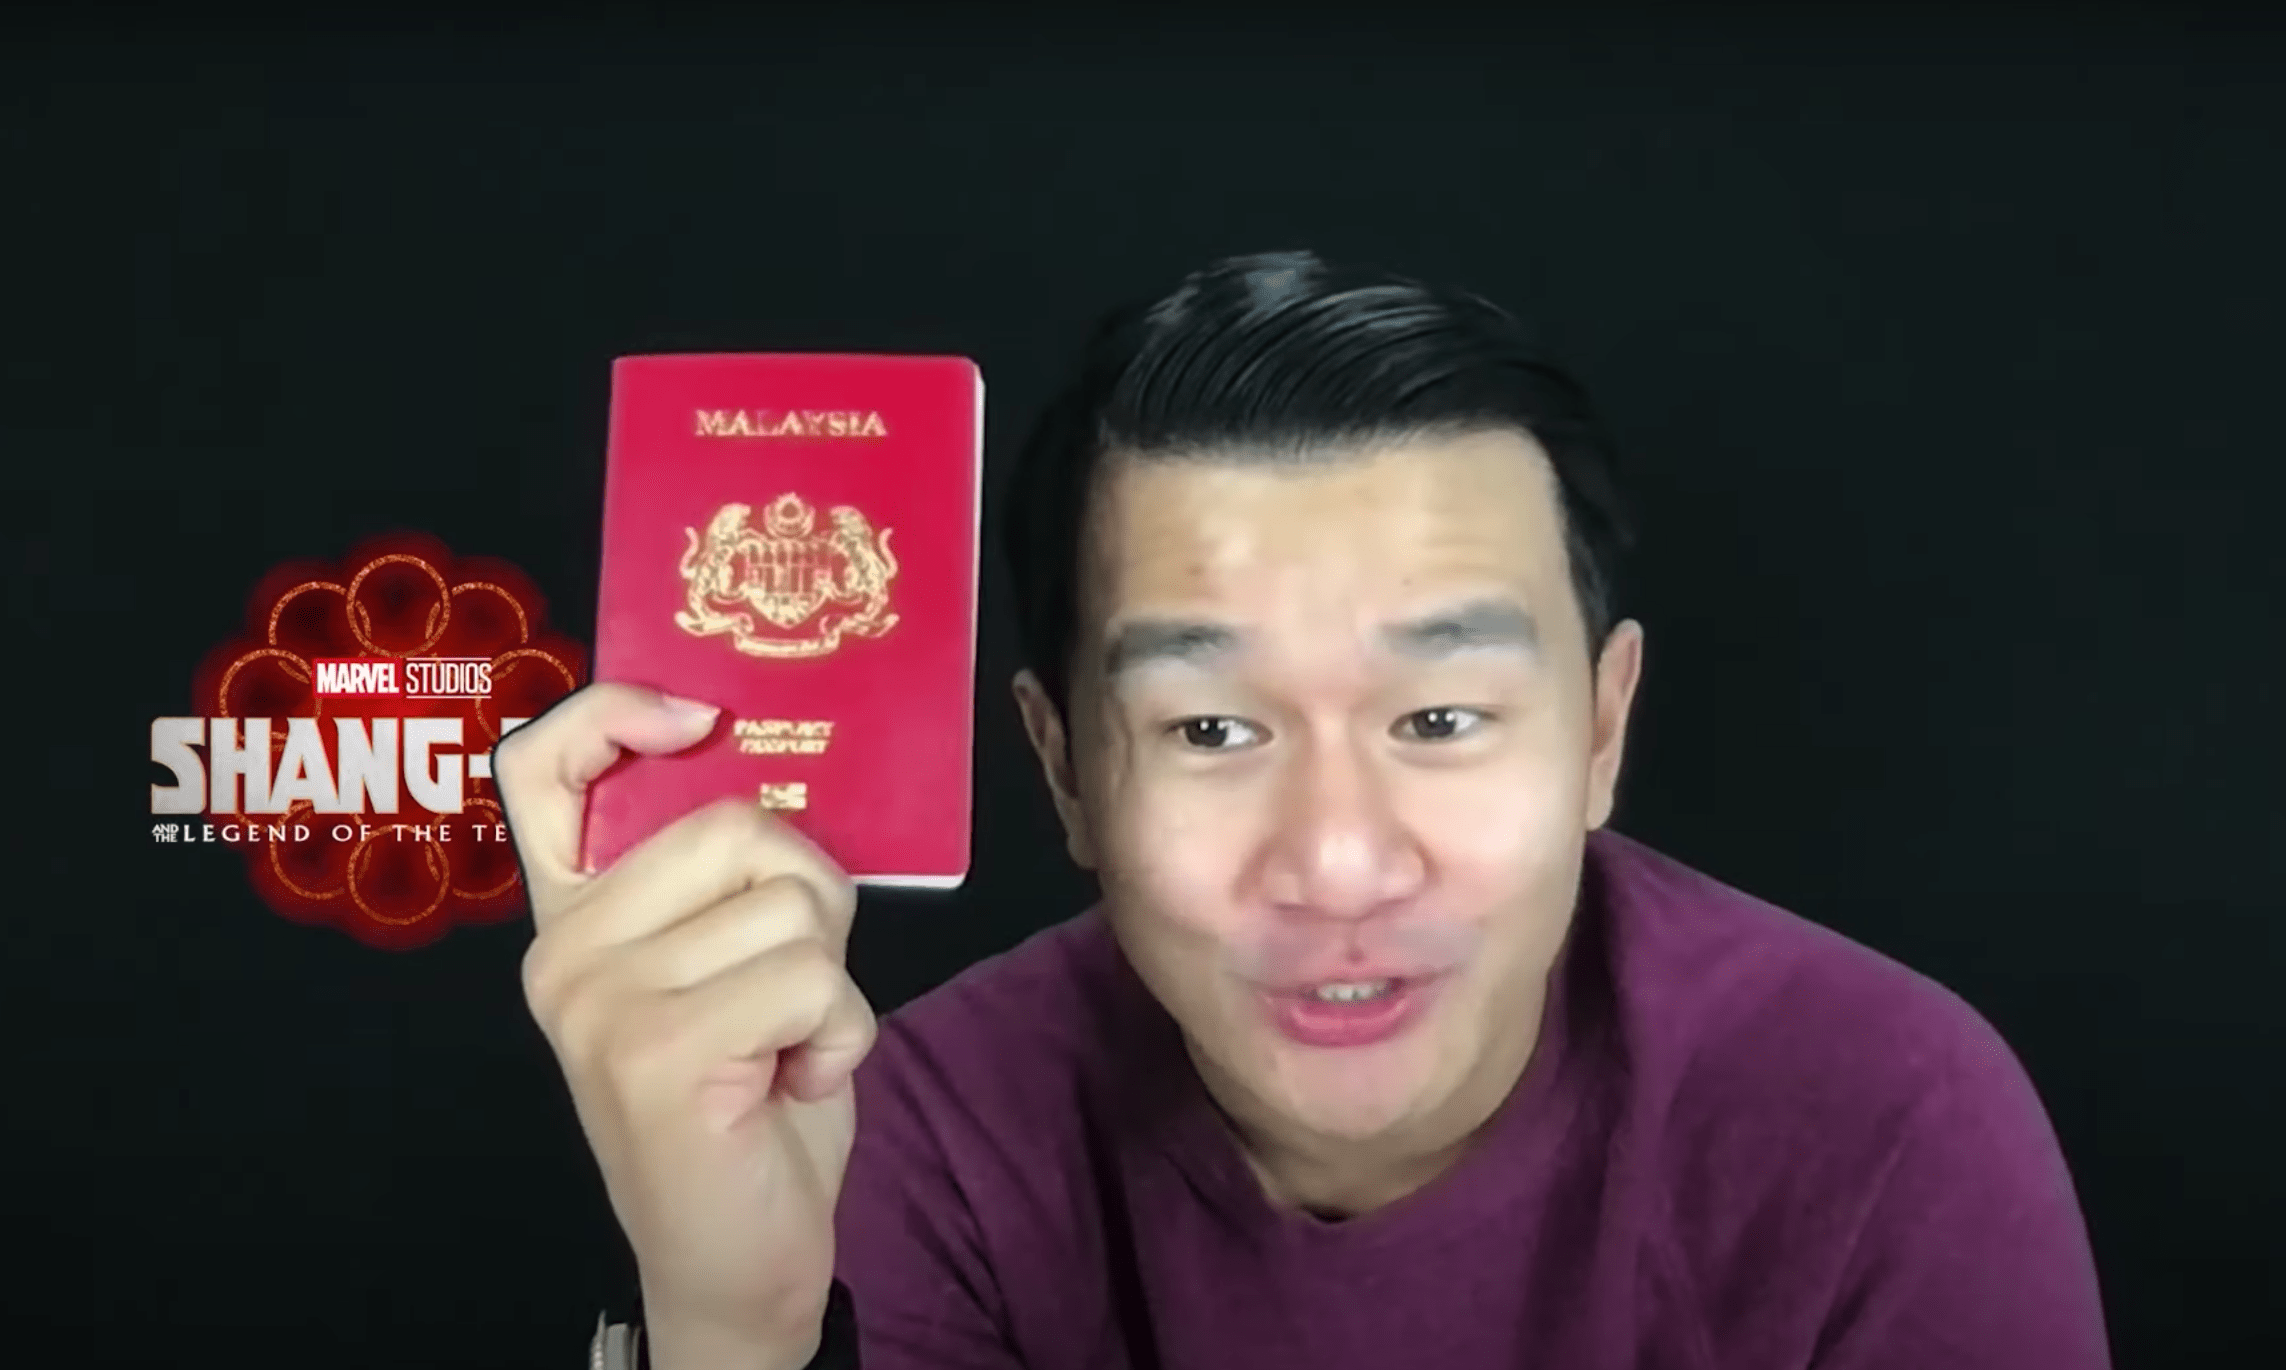 Ronny Chieng facts - Malaysian